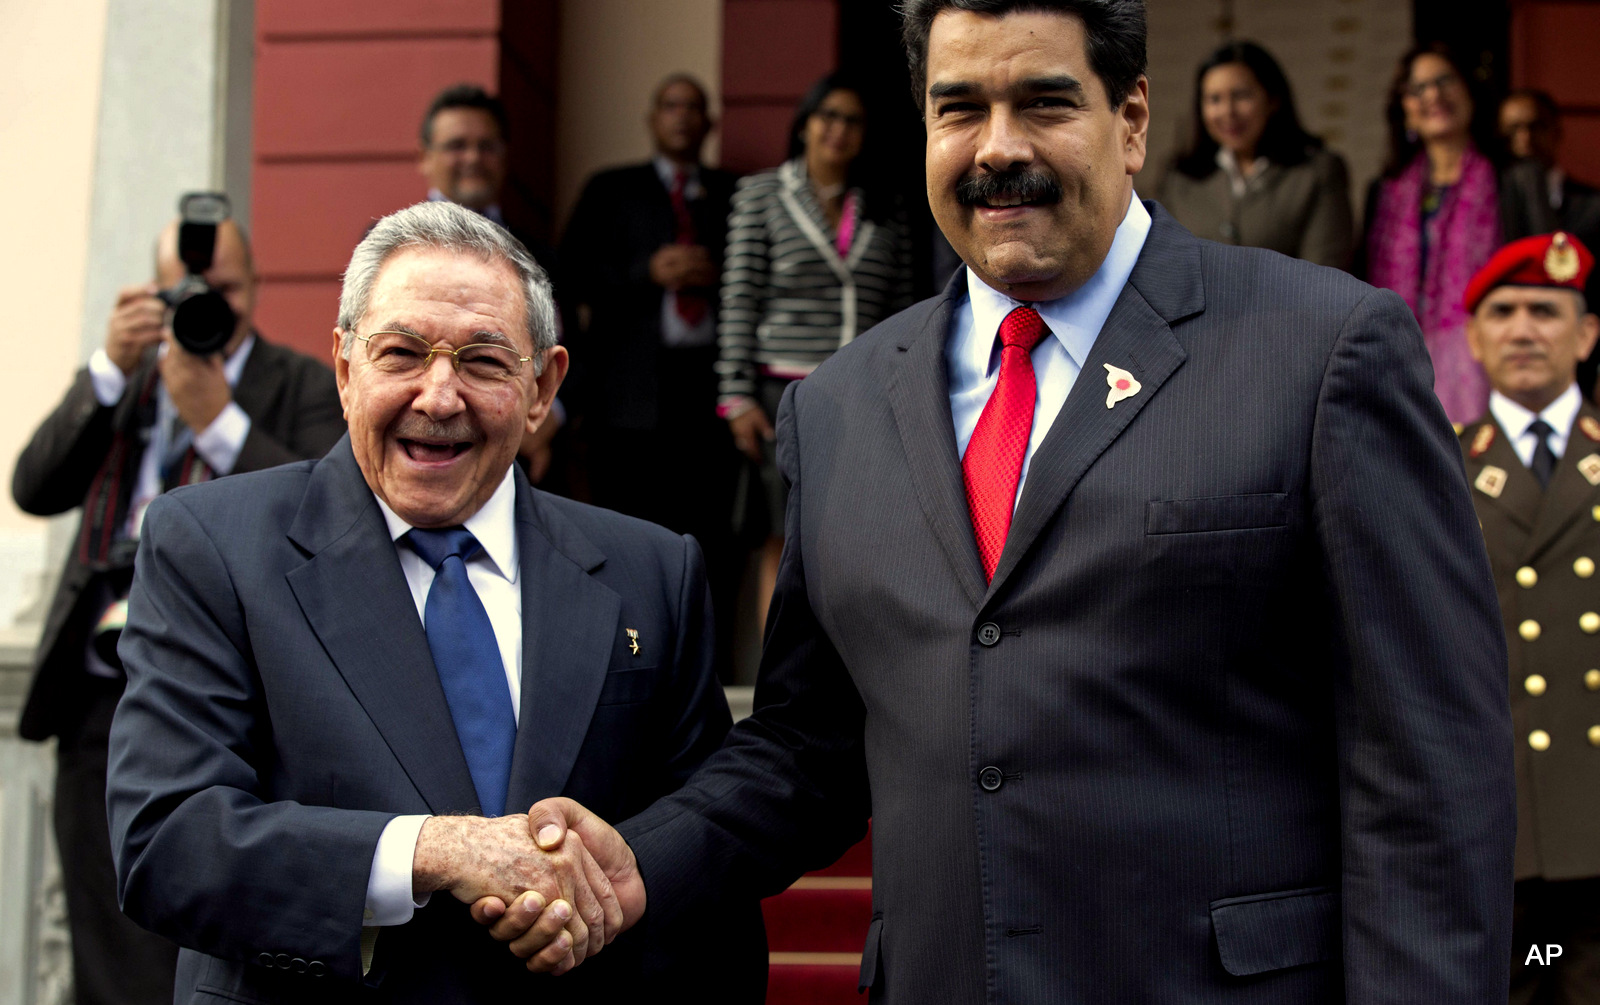 Cuba's President Raul Castro, left, shakes hands with Venezuela's President Nicolas Maduro in front of the press after arriving to Miraflores presidential palace for an emergency ALBA meeting in Caracas, Venezuela, Tuesday, March 17, 2015. 